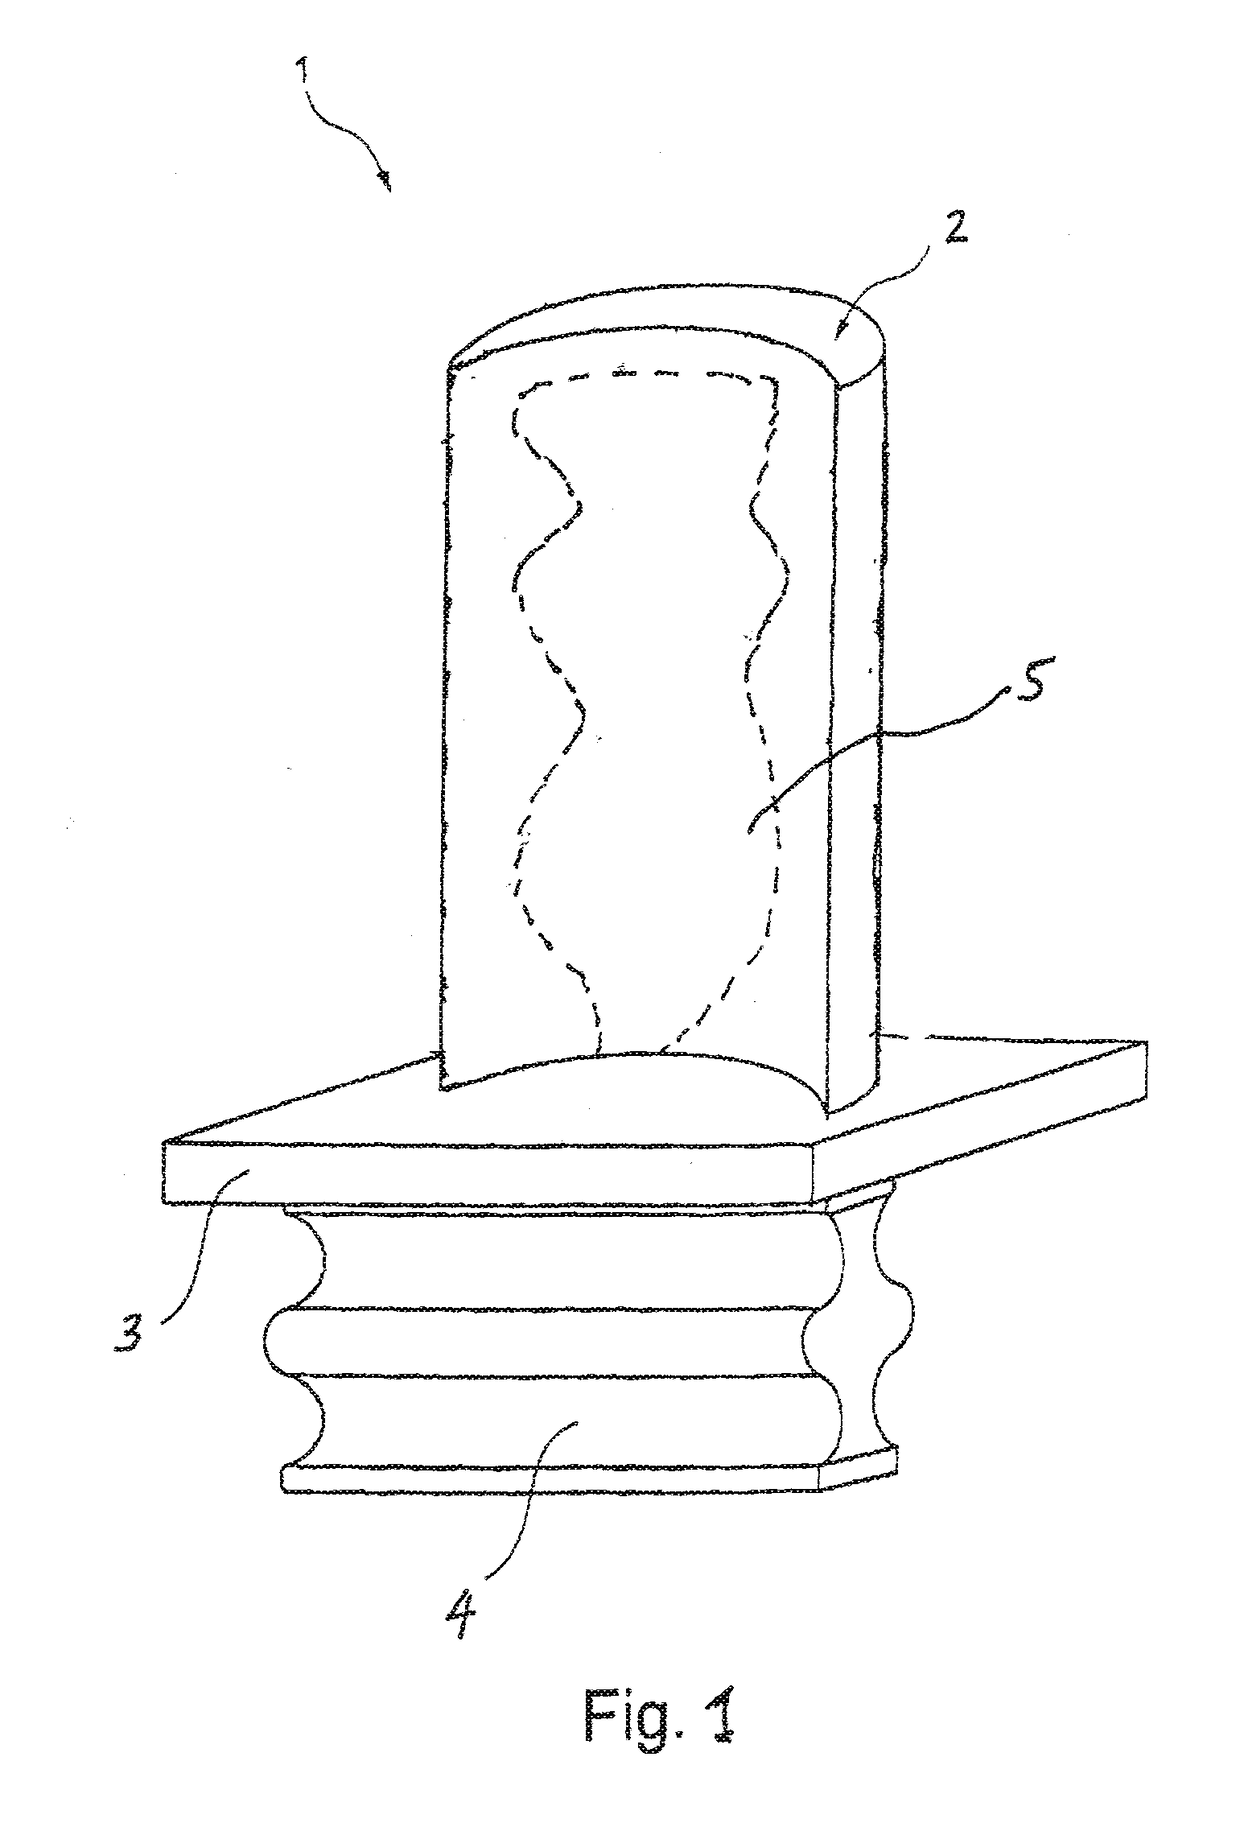 Turbine blade comprising a cavity with wall surface discontinuities and process for the production thereof